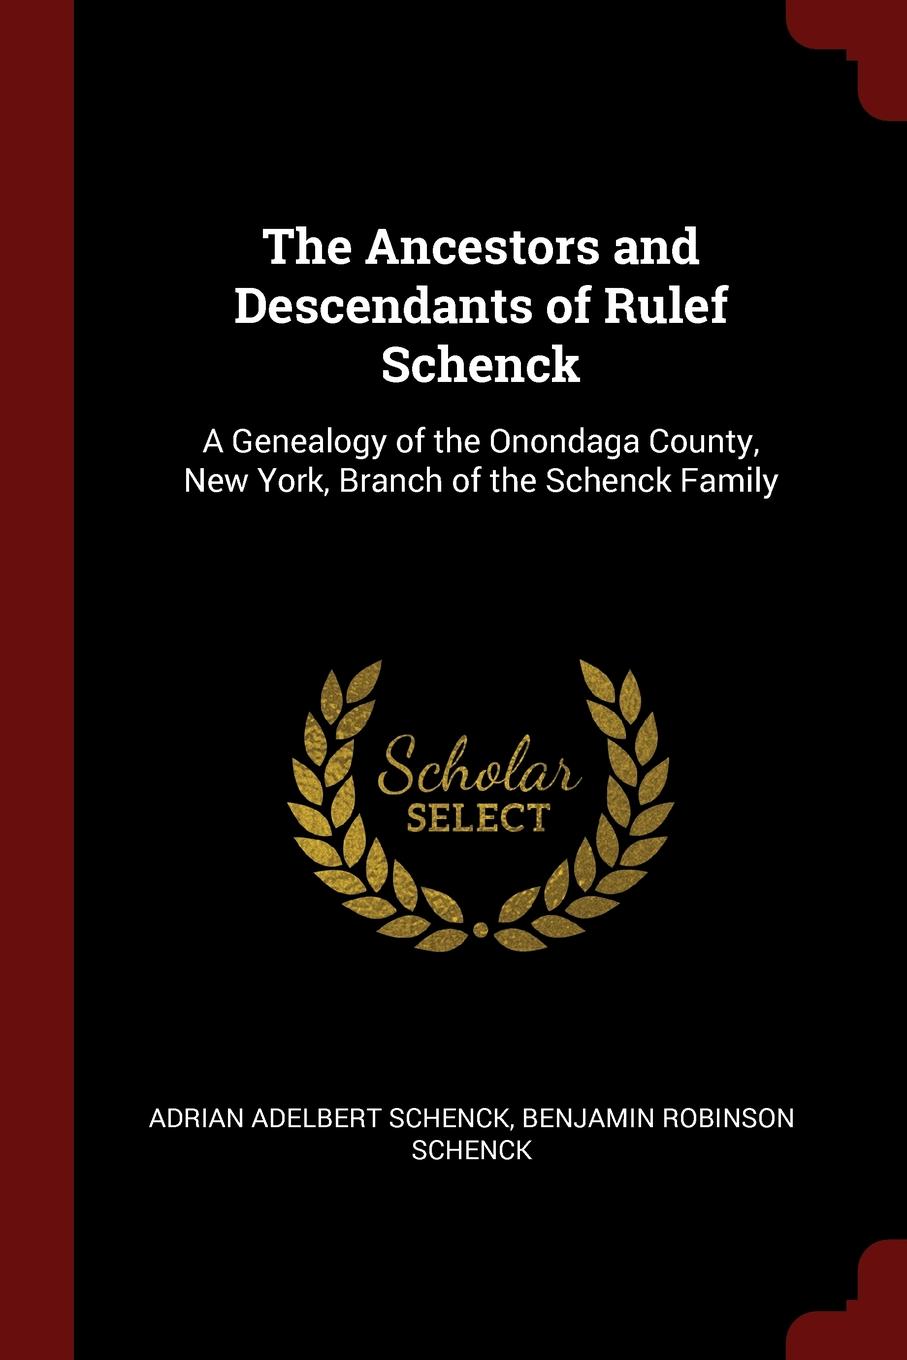 The Ancestors and Descendants of Rulef Schenck. A Genealogy of the Onondaga County, New York, Branch of the Schenck Family